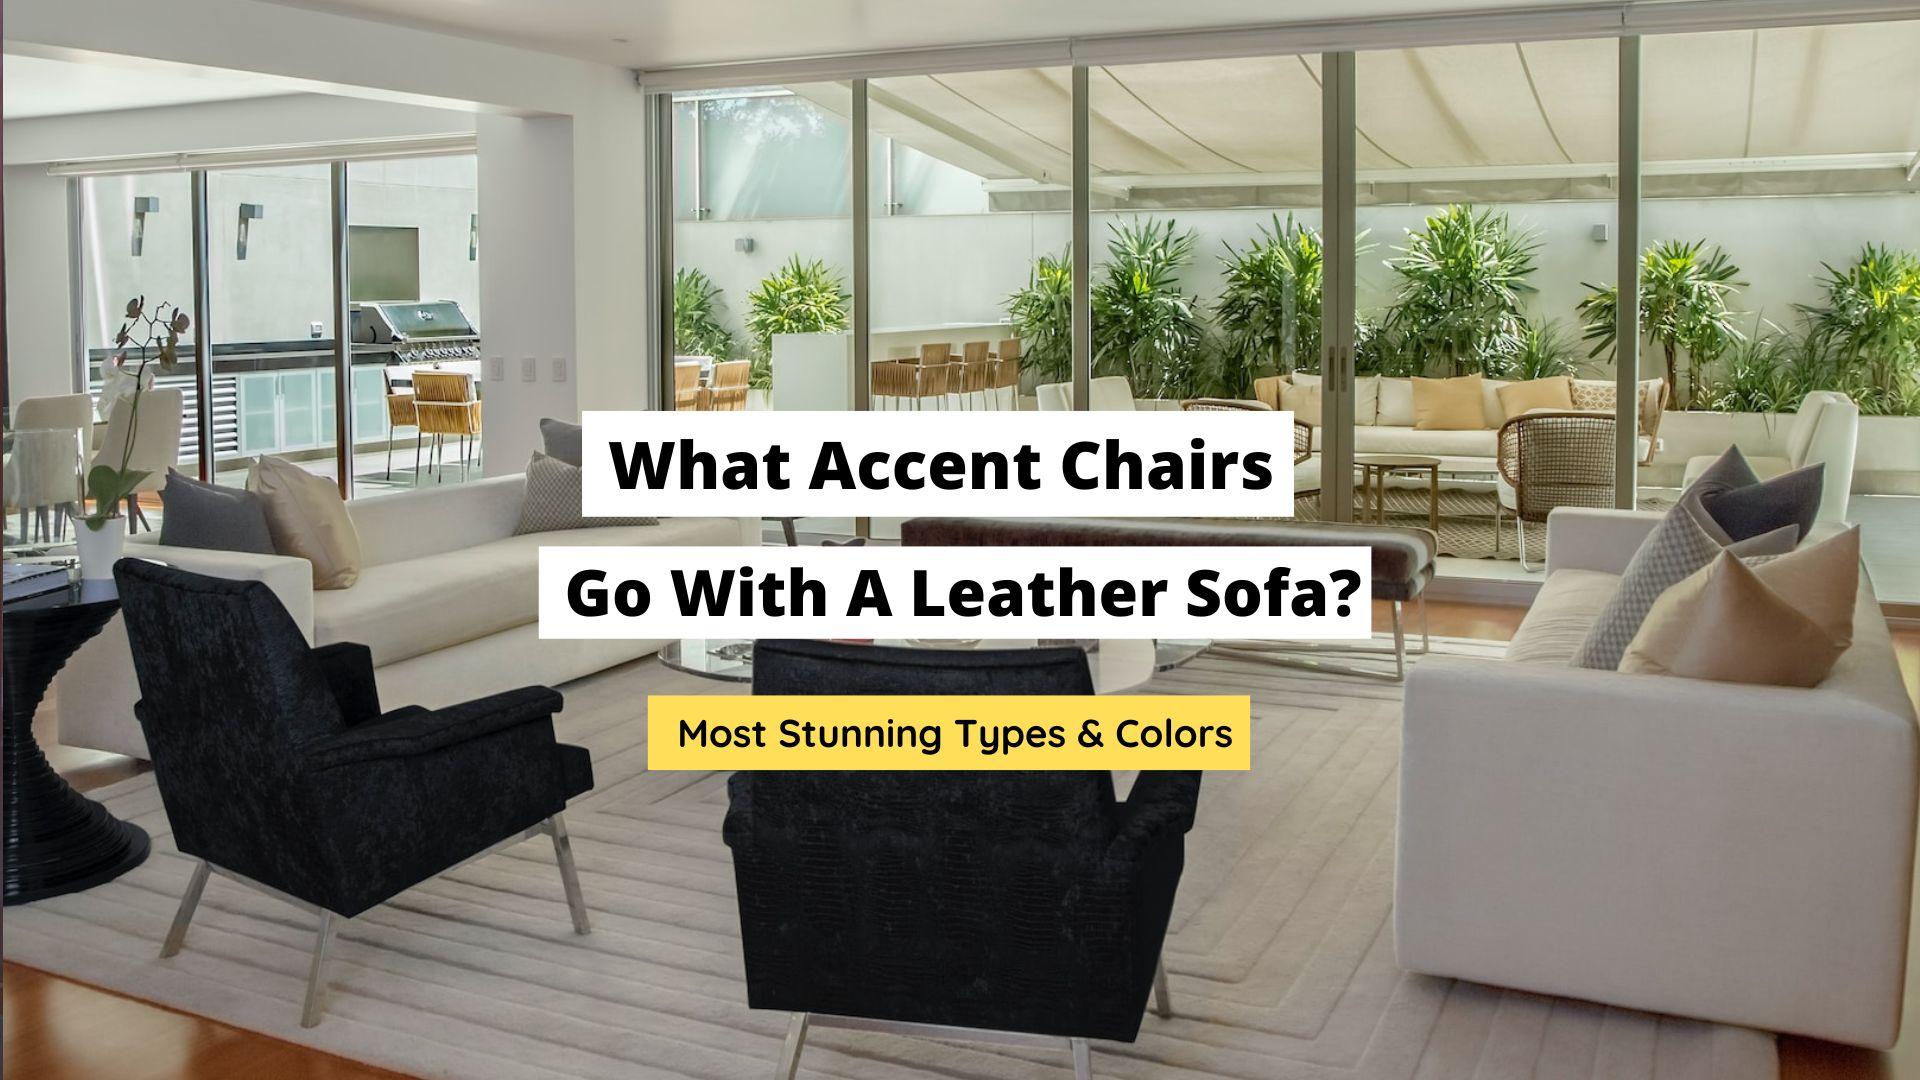 What Accent Chairs Go With A Leather Sofa